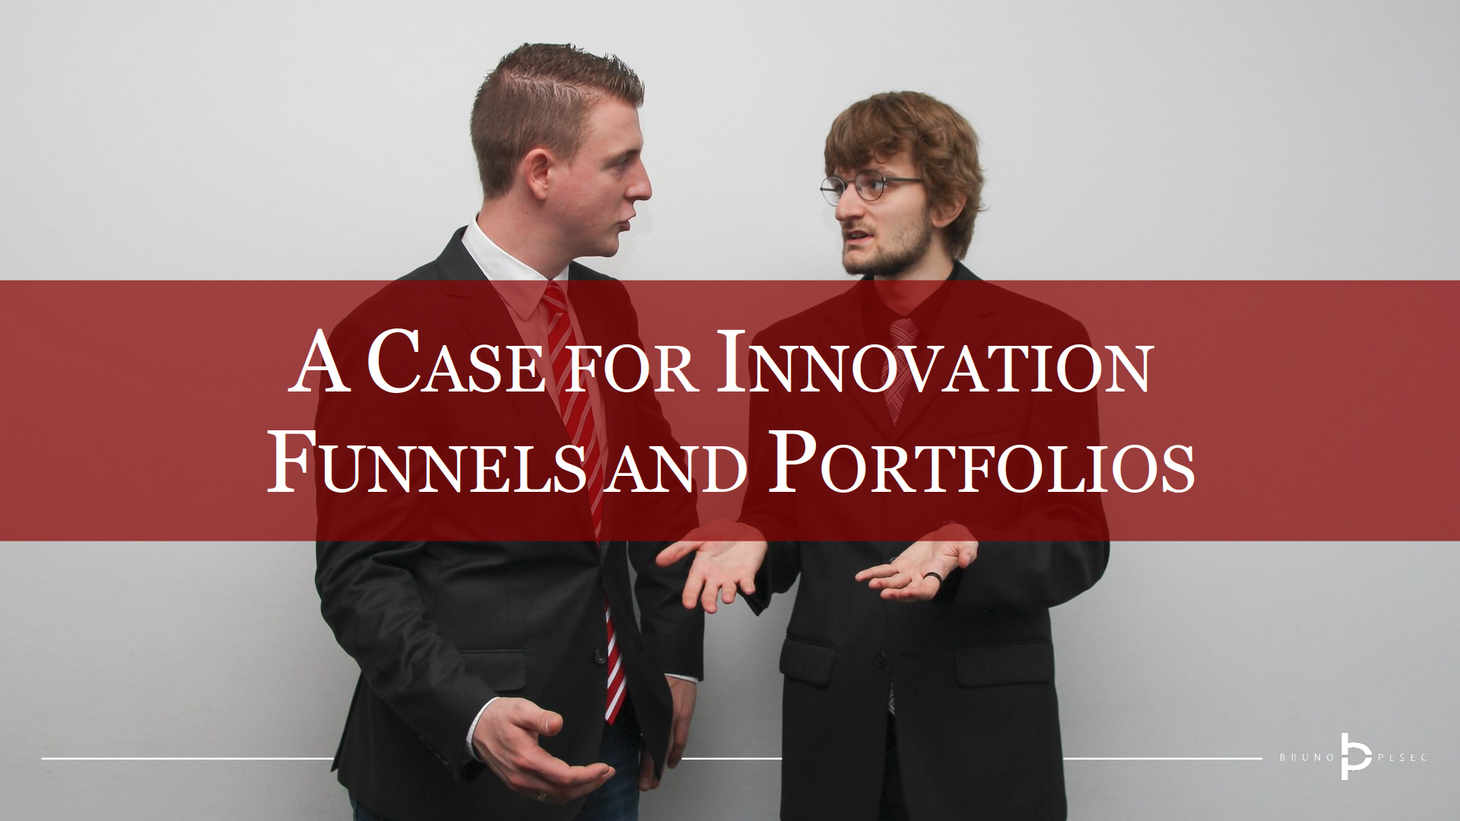 A case for innovation funnels and portfolios